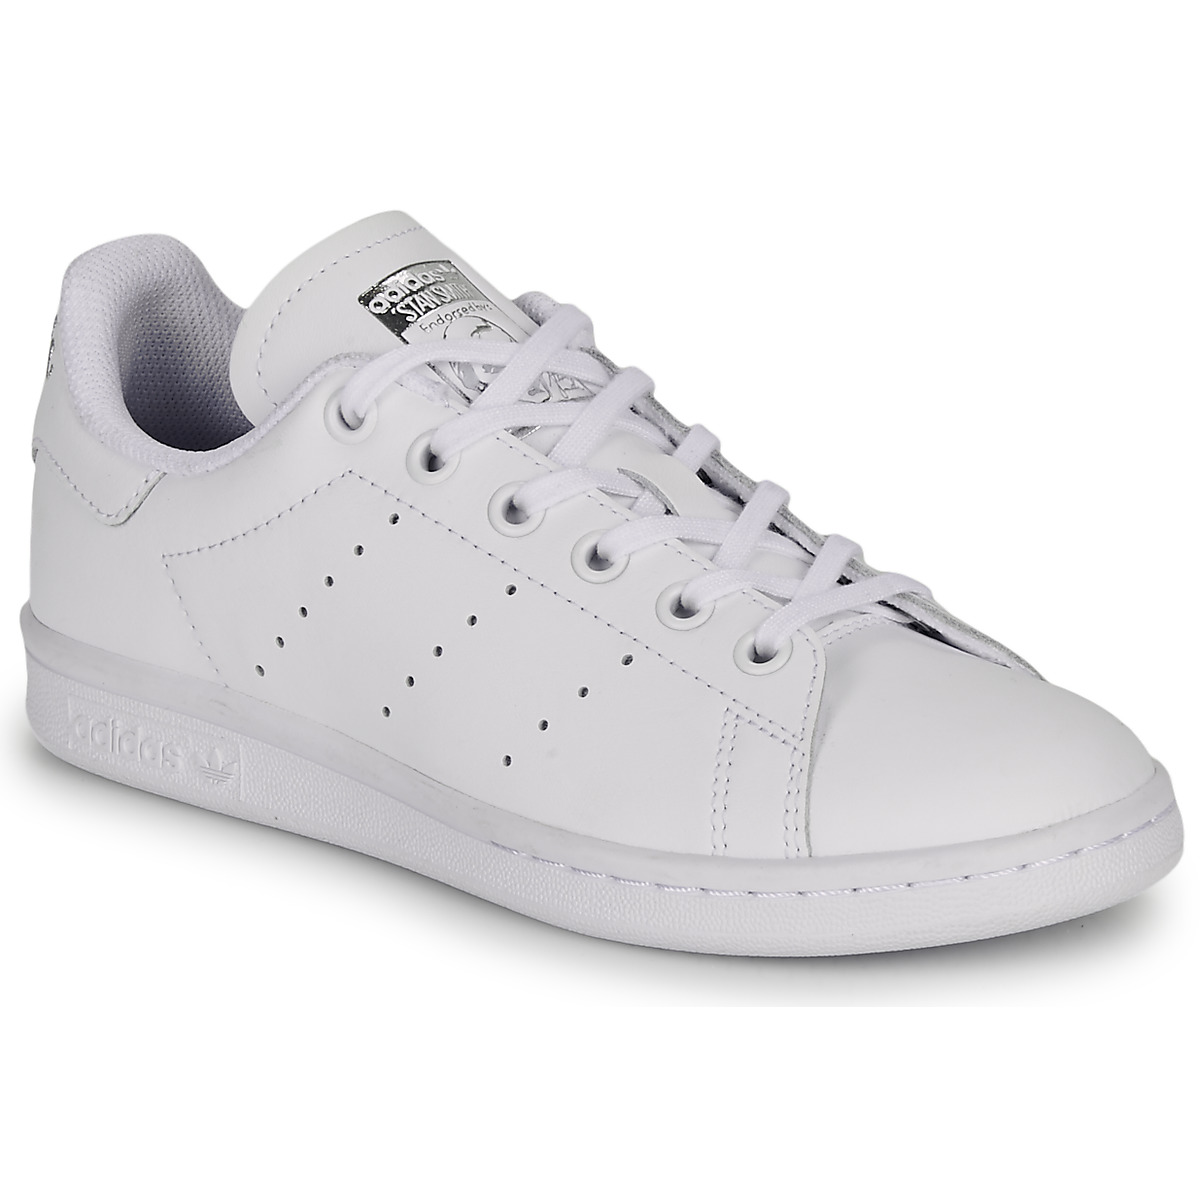 Chaussures Enfant adidas giant tent sale in orlando county STAN SMITH J Blanc